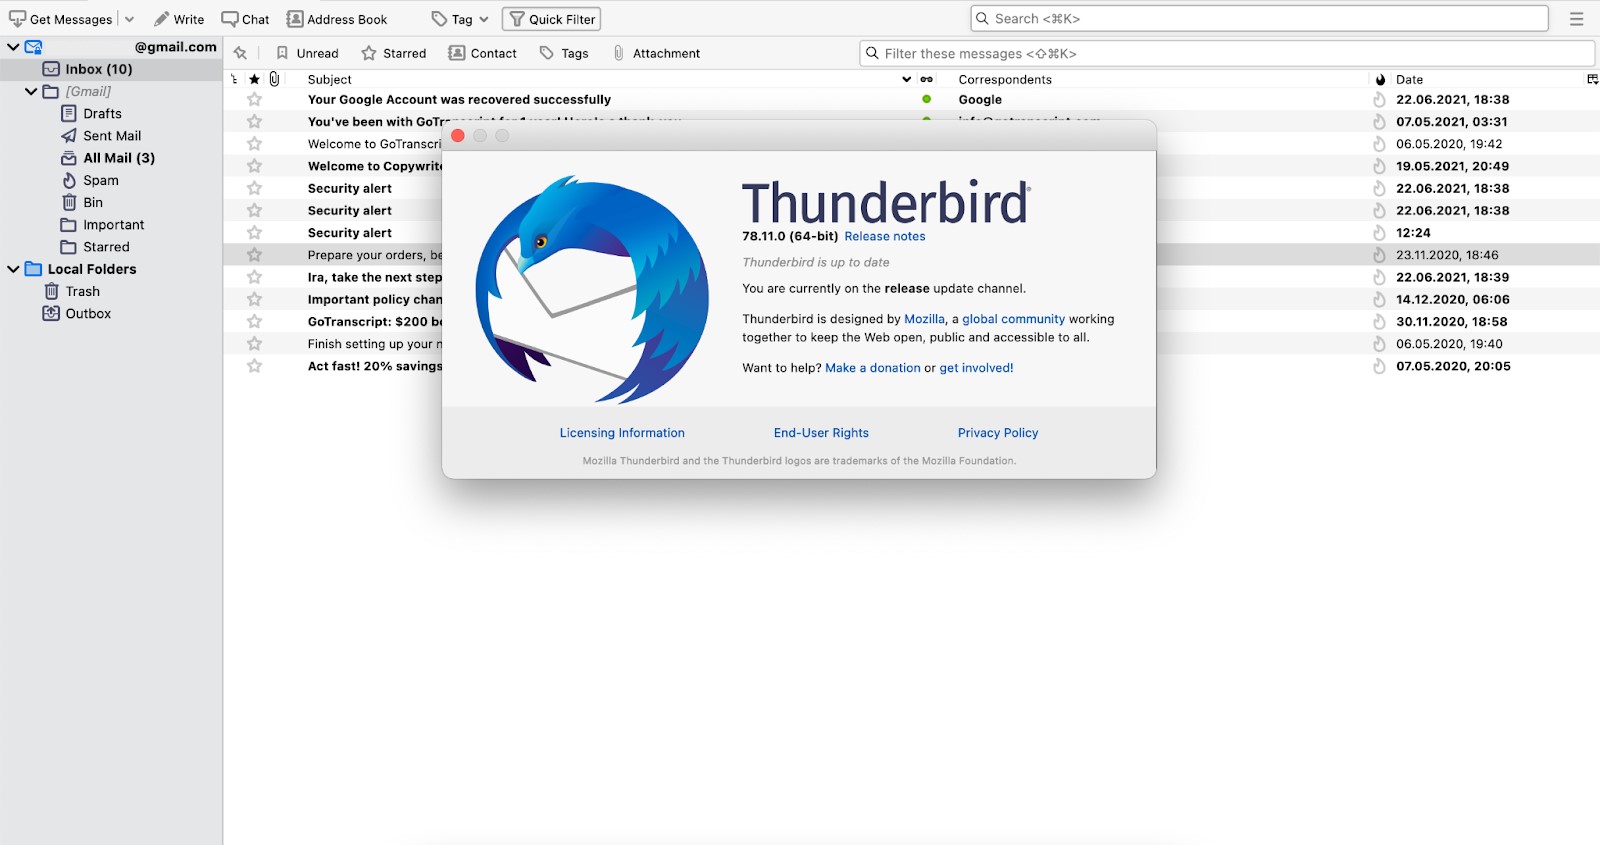 How To Mark All Messages As Read Quickly In Mozilla Thunderbird